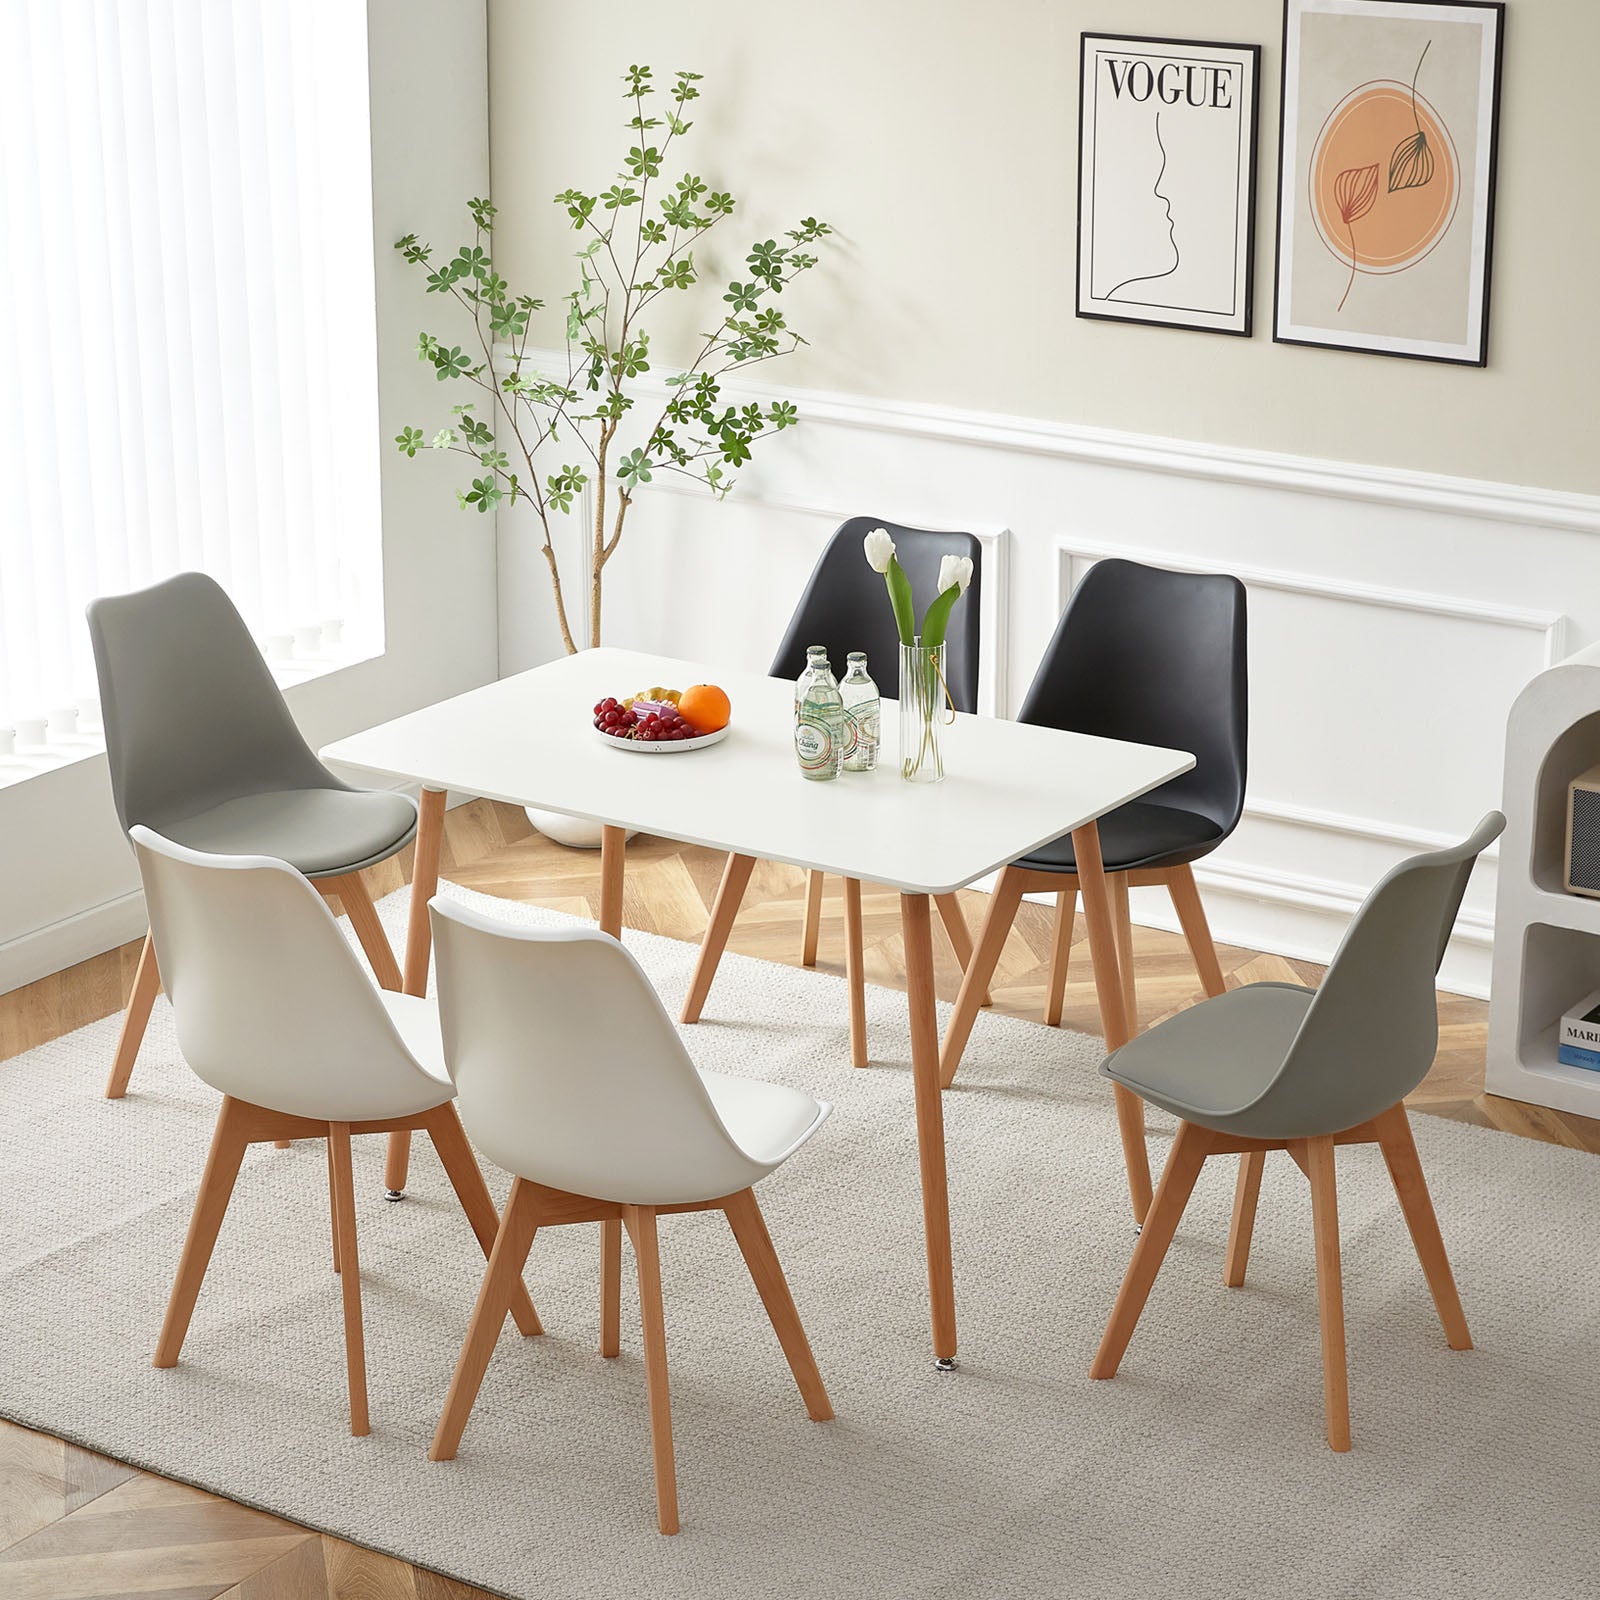 TULIP PP Dining Chairs with Beech Legs Scandinavian Design Kitchen Chairs - Black and White and Grey